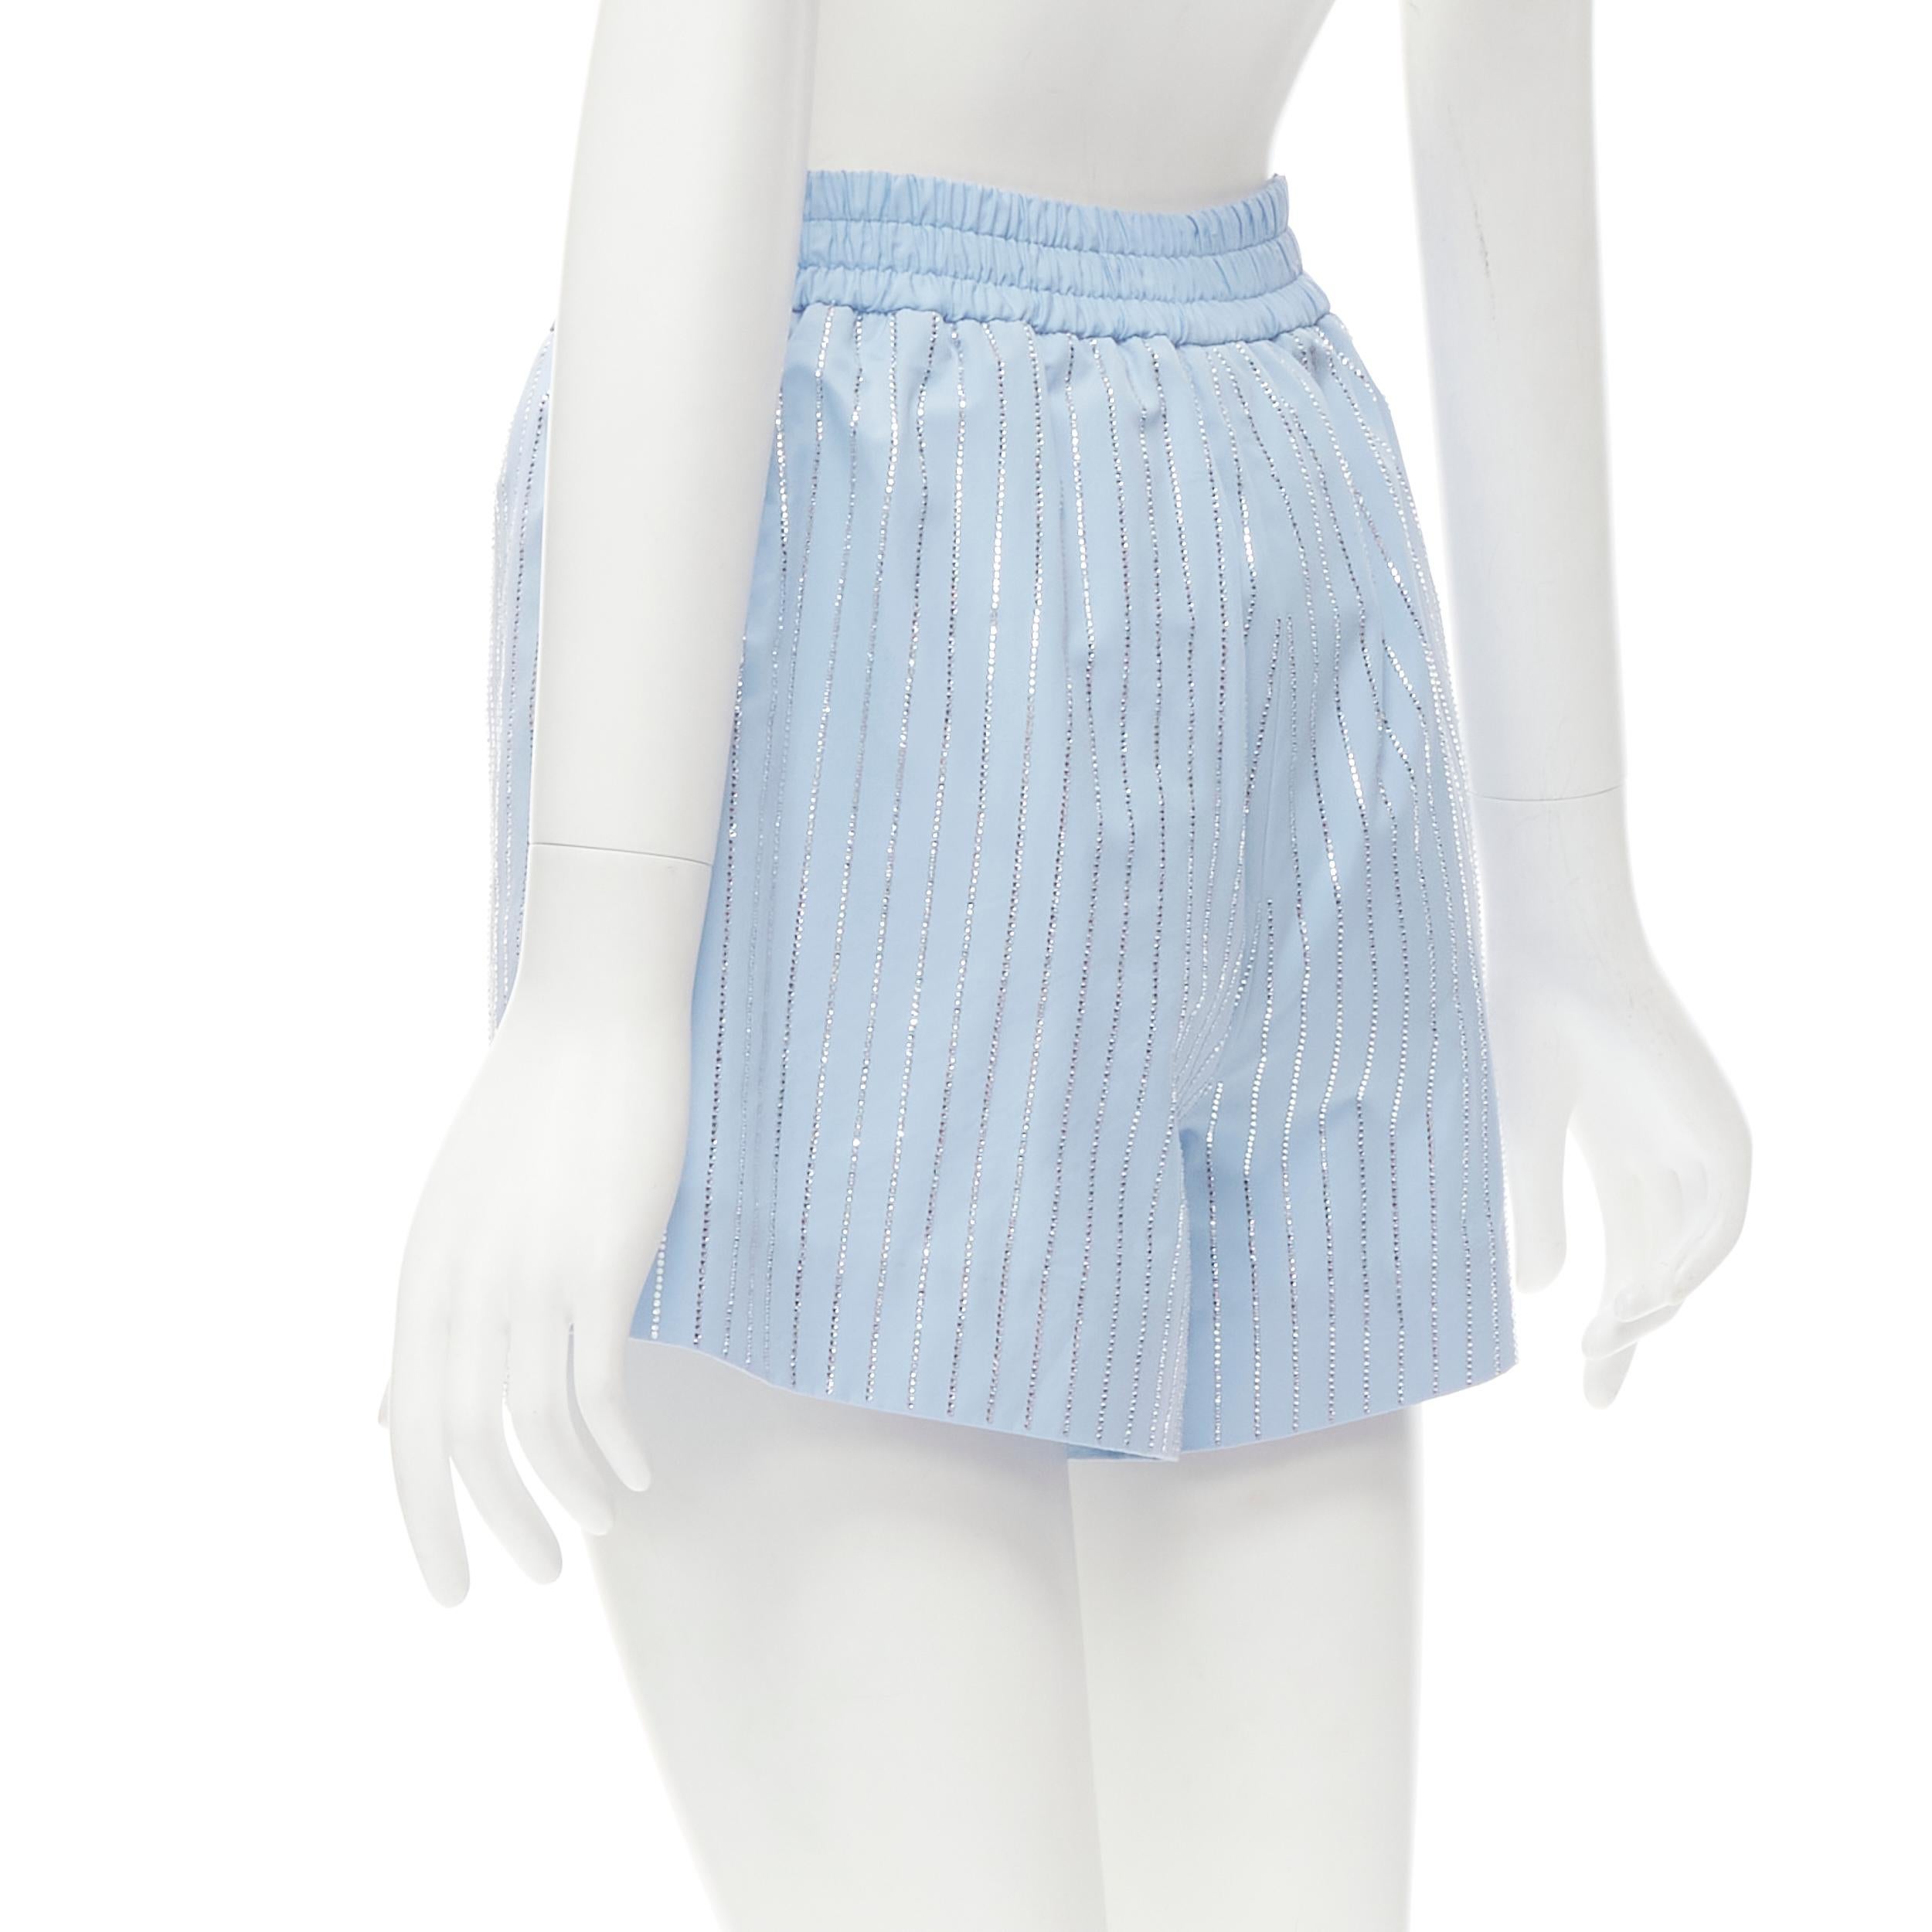 ALEXANDER WANG Crystal Hotfix blue cotton oxford striped encrusted shorts S 
Reference: ANWU/A00392 
Brand: Alexander Wang 
Material: Cotton 
Color: Blue 
Pattern: Striped 
Closure: Button 
Extra Detail: Crystal encrusted pinstripes. Alexander Wang